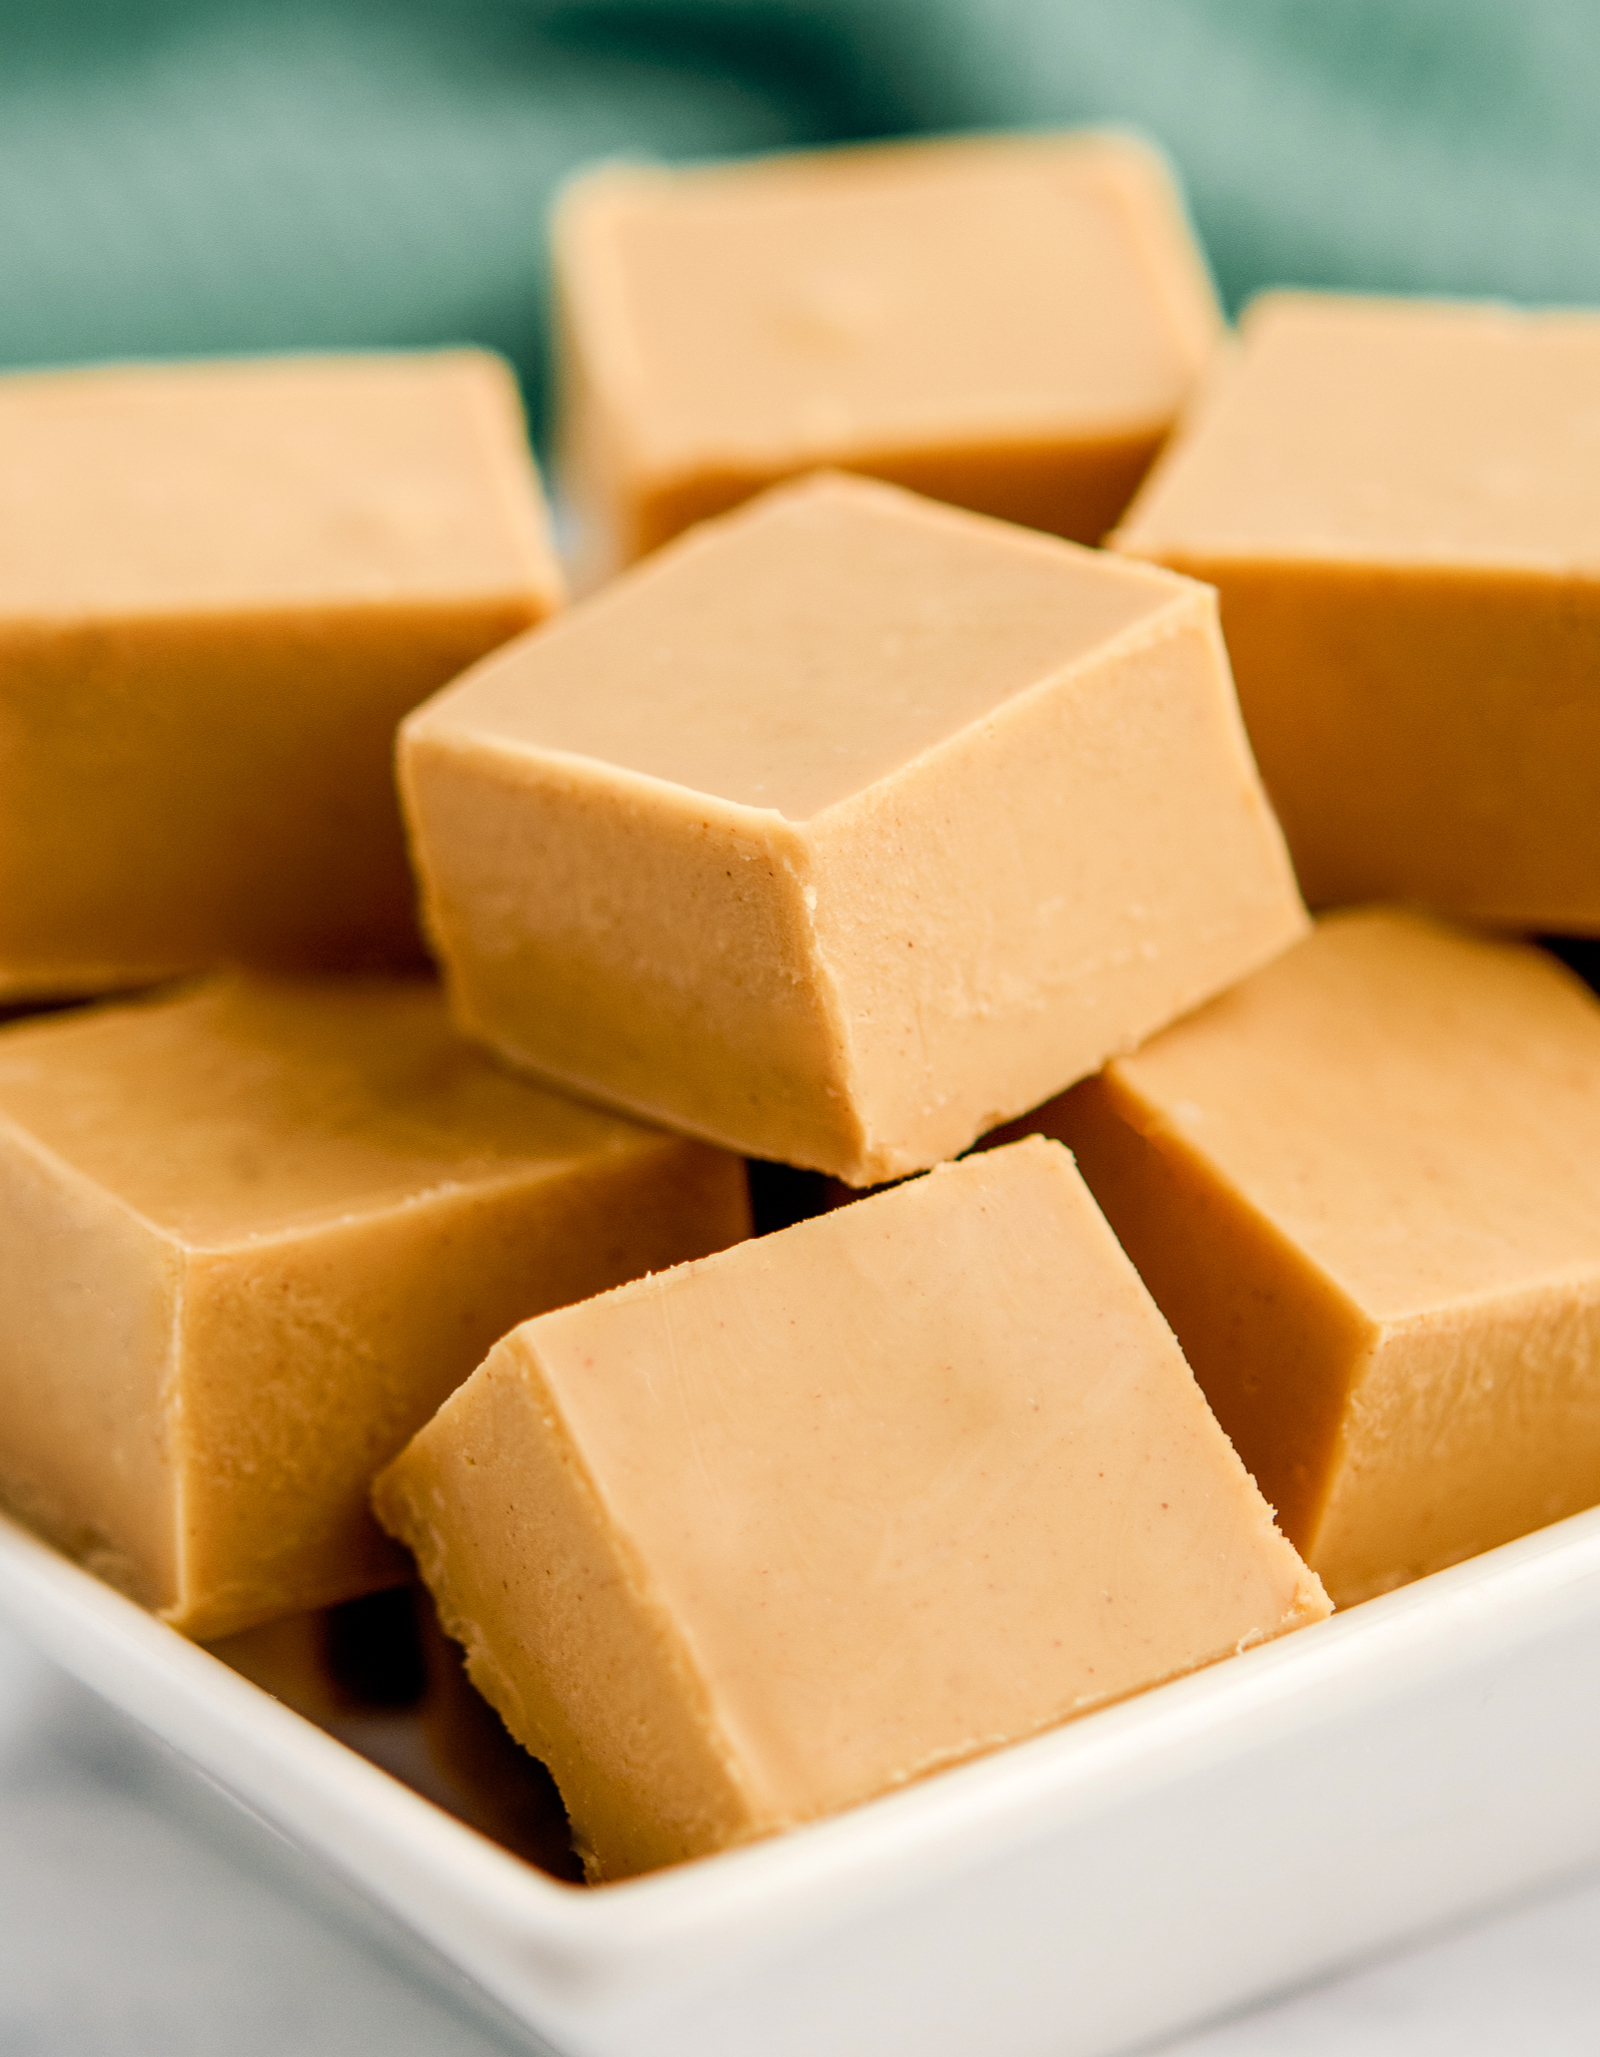 Squares of Peanut Butter Fudge in White Bowl